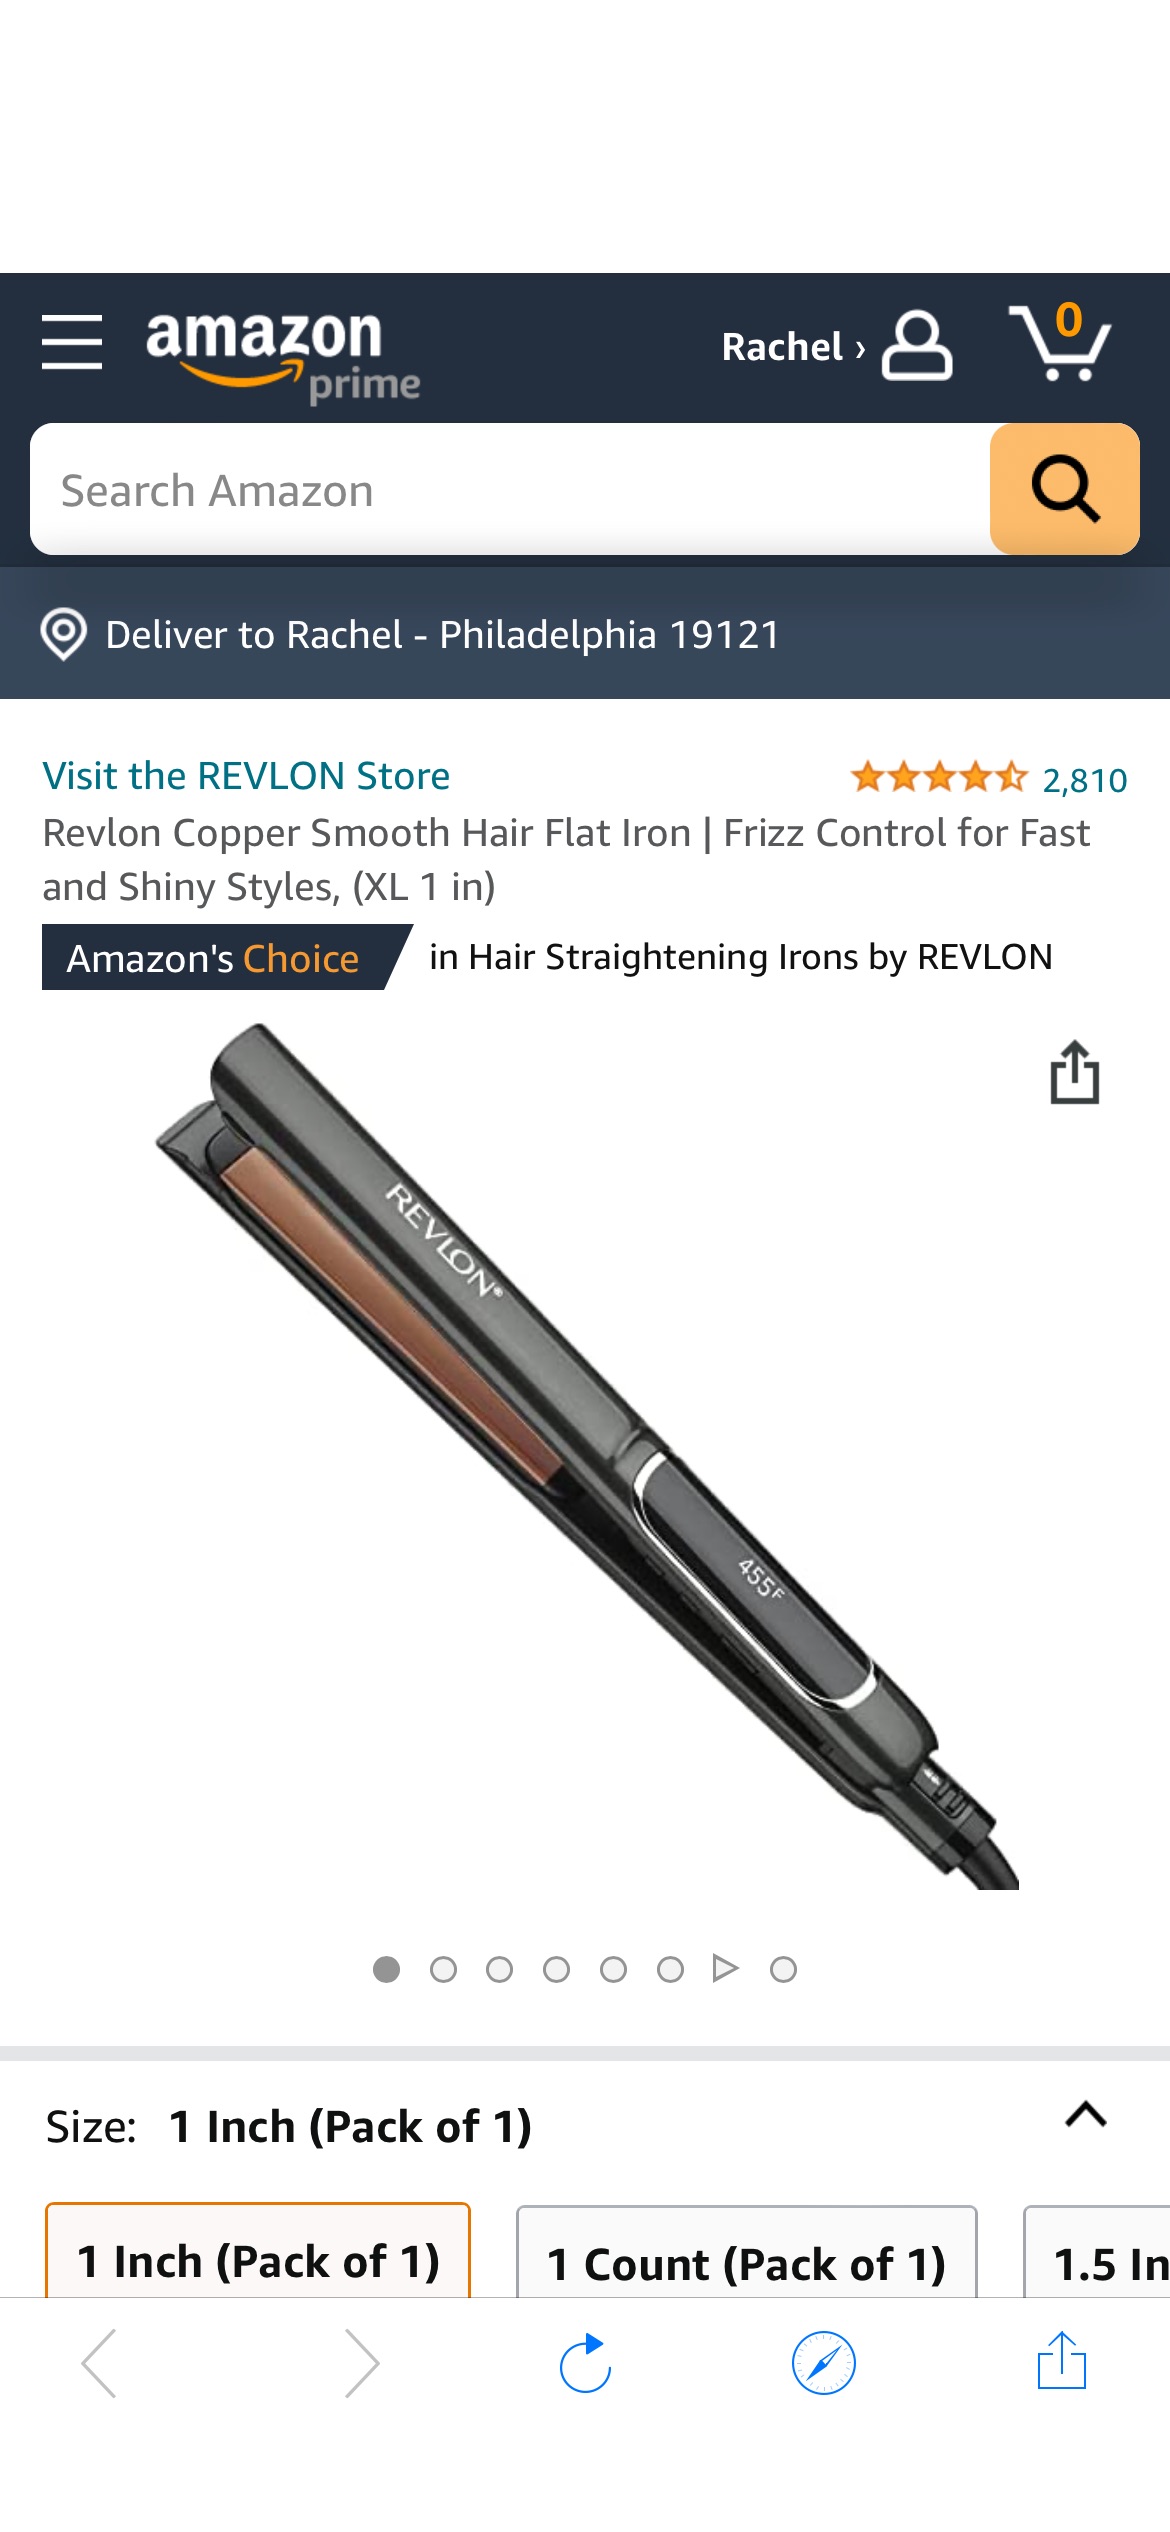 Amazon.com: Revlon Copper Smooth Hair Flat Iron | Frizz Control for Fast and Shiny Styles, (XL 1 in) : Everything Else